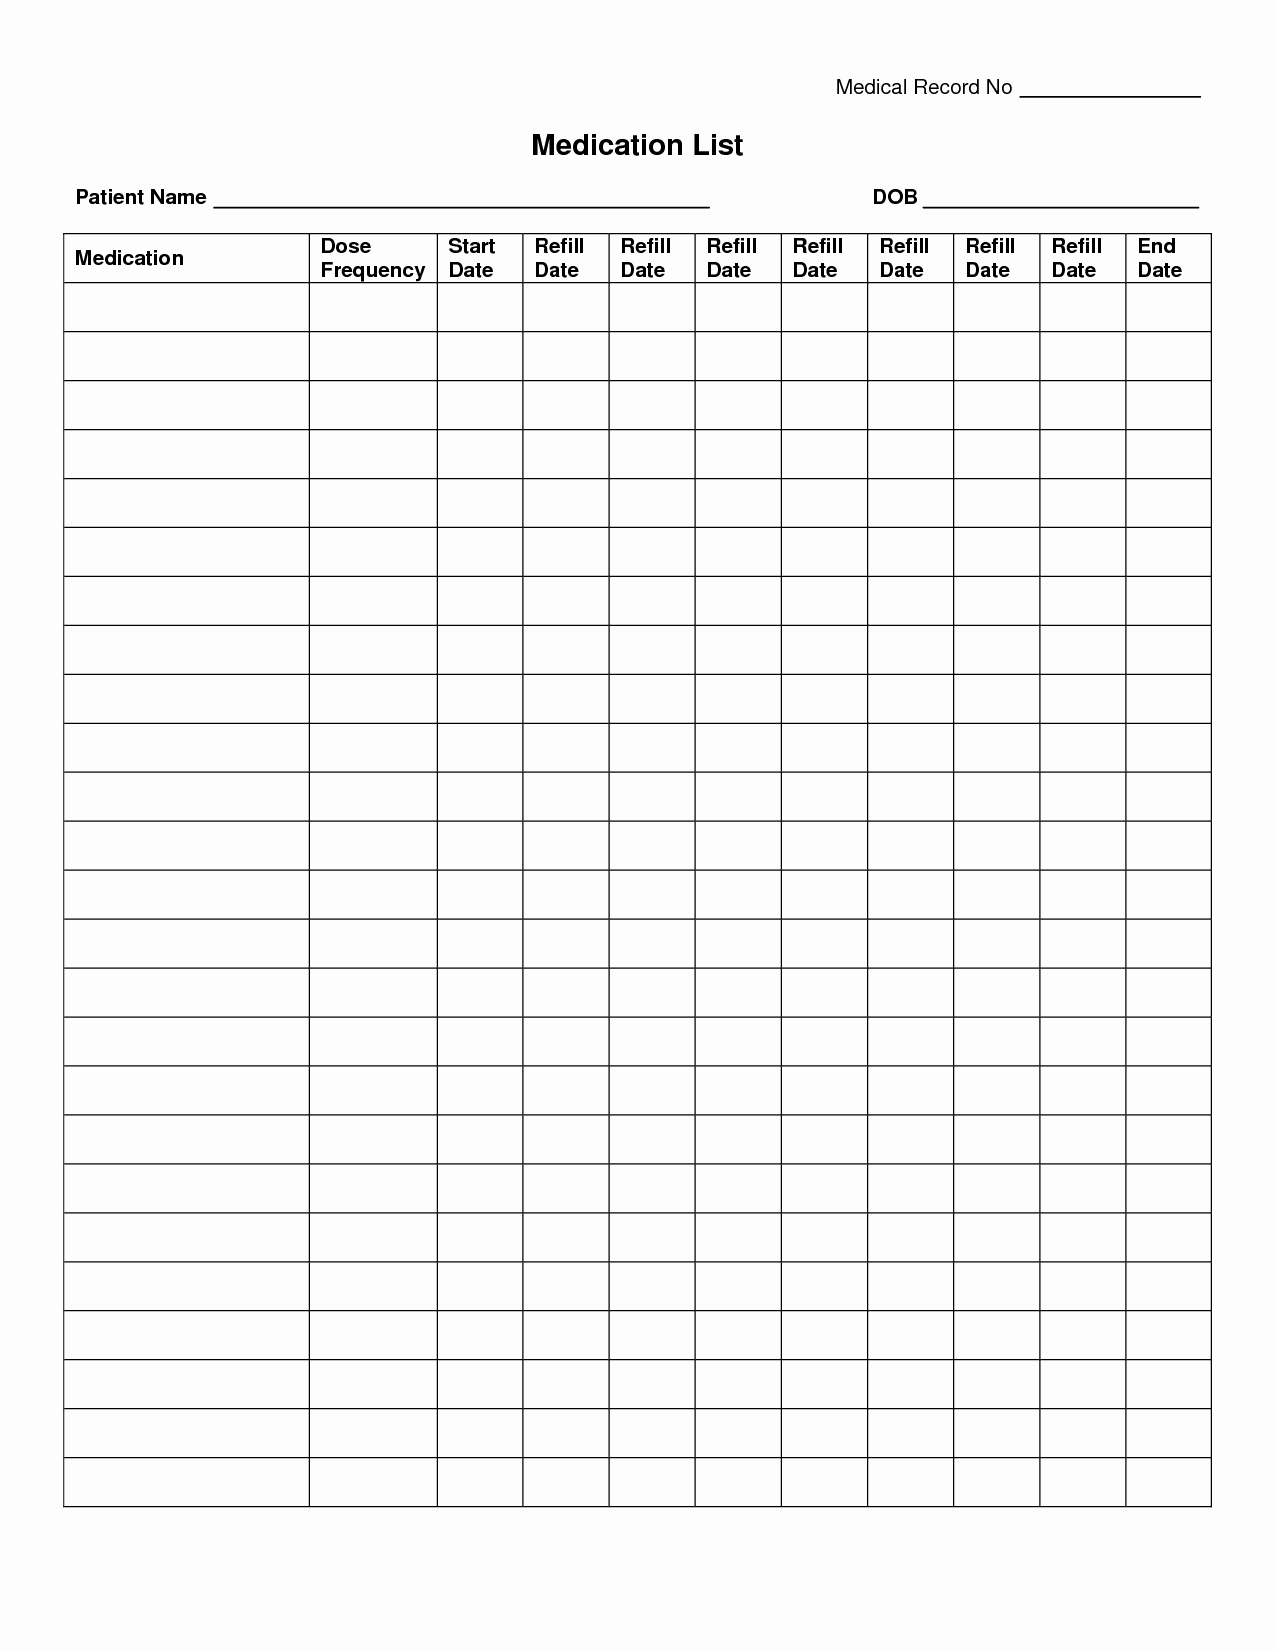 Medication Administration Records Template Awesome Free Medication Administration Record Template Excel